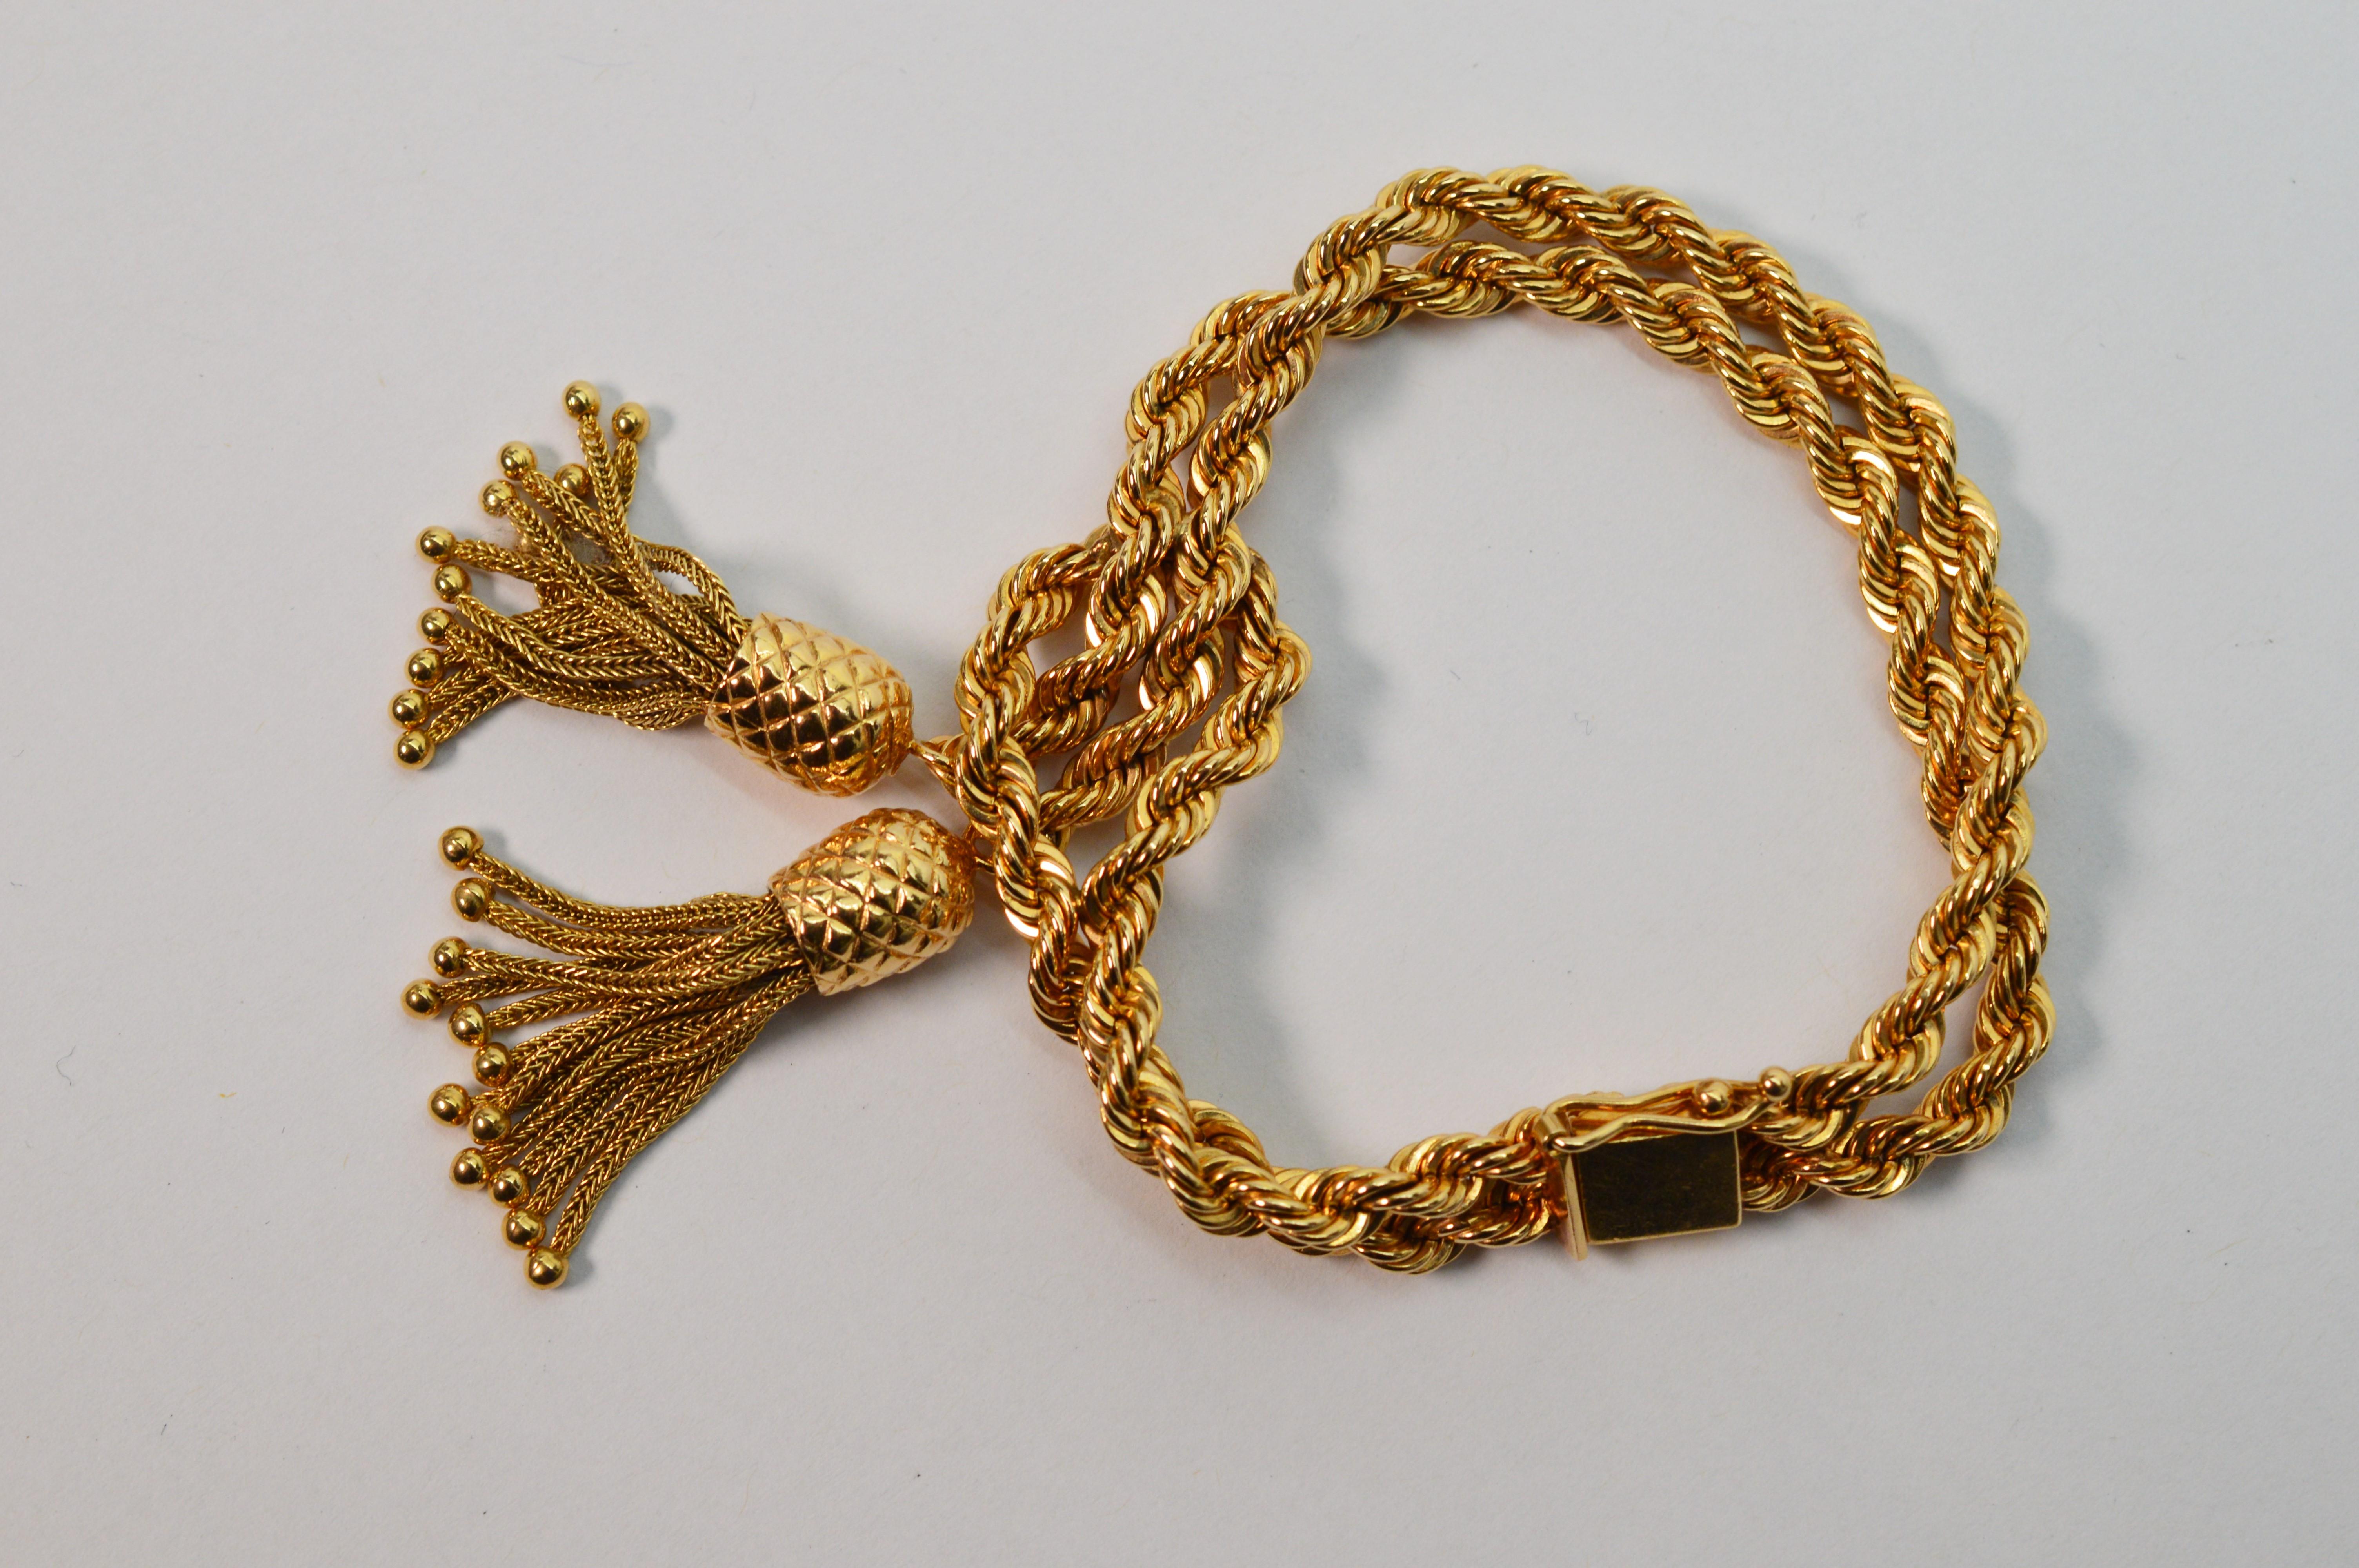 Double Rope Chain 14 Karat Yellow Gold Bracelet with Pineapple Charm Tassels 4